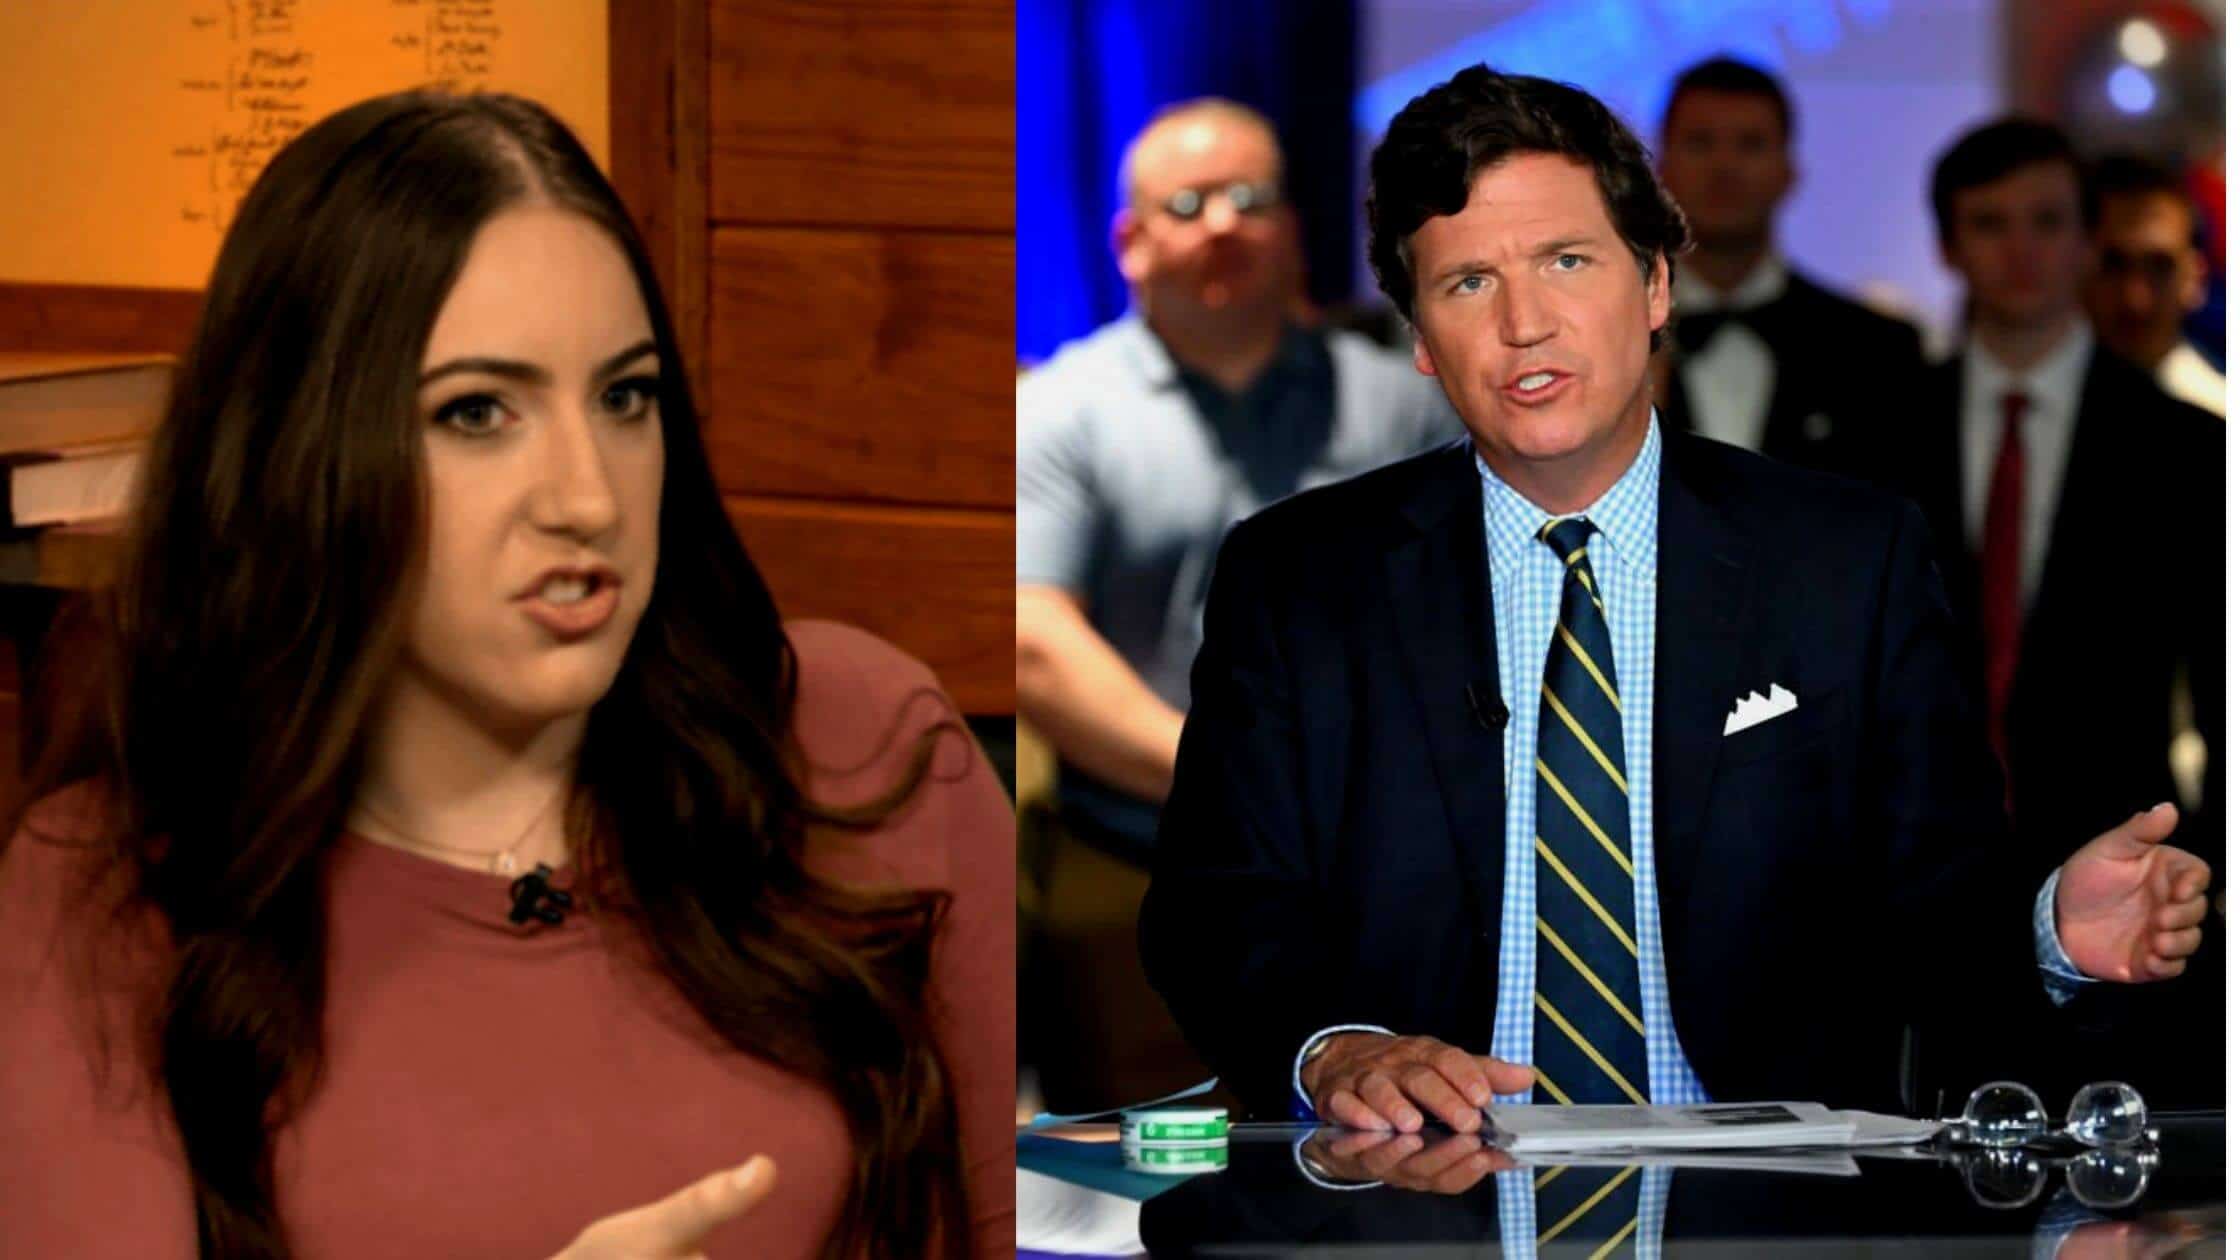 Libs Of TikTok's Anti-LGBTQ Hatred Has Just Been Amplified By Tucker Carlson